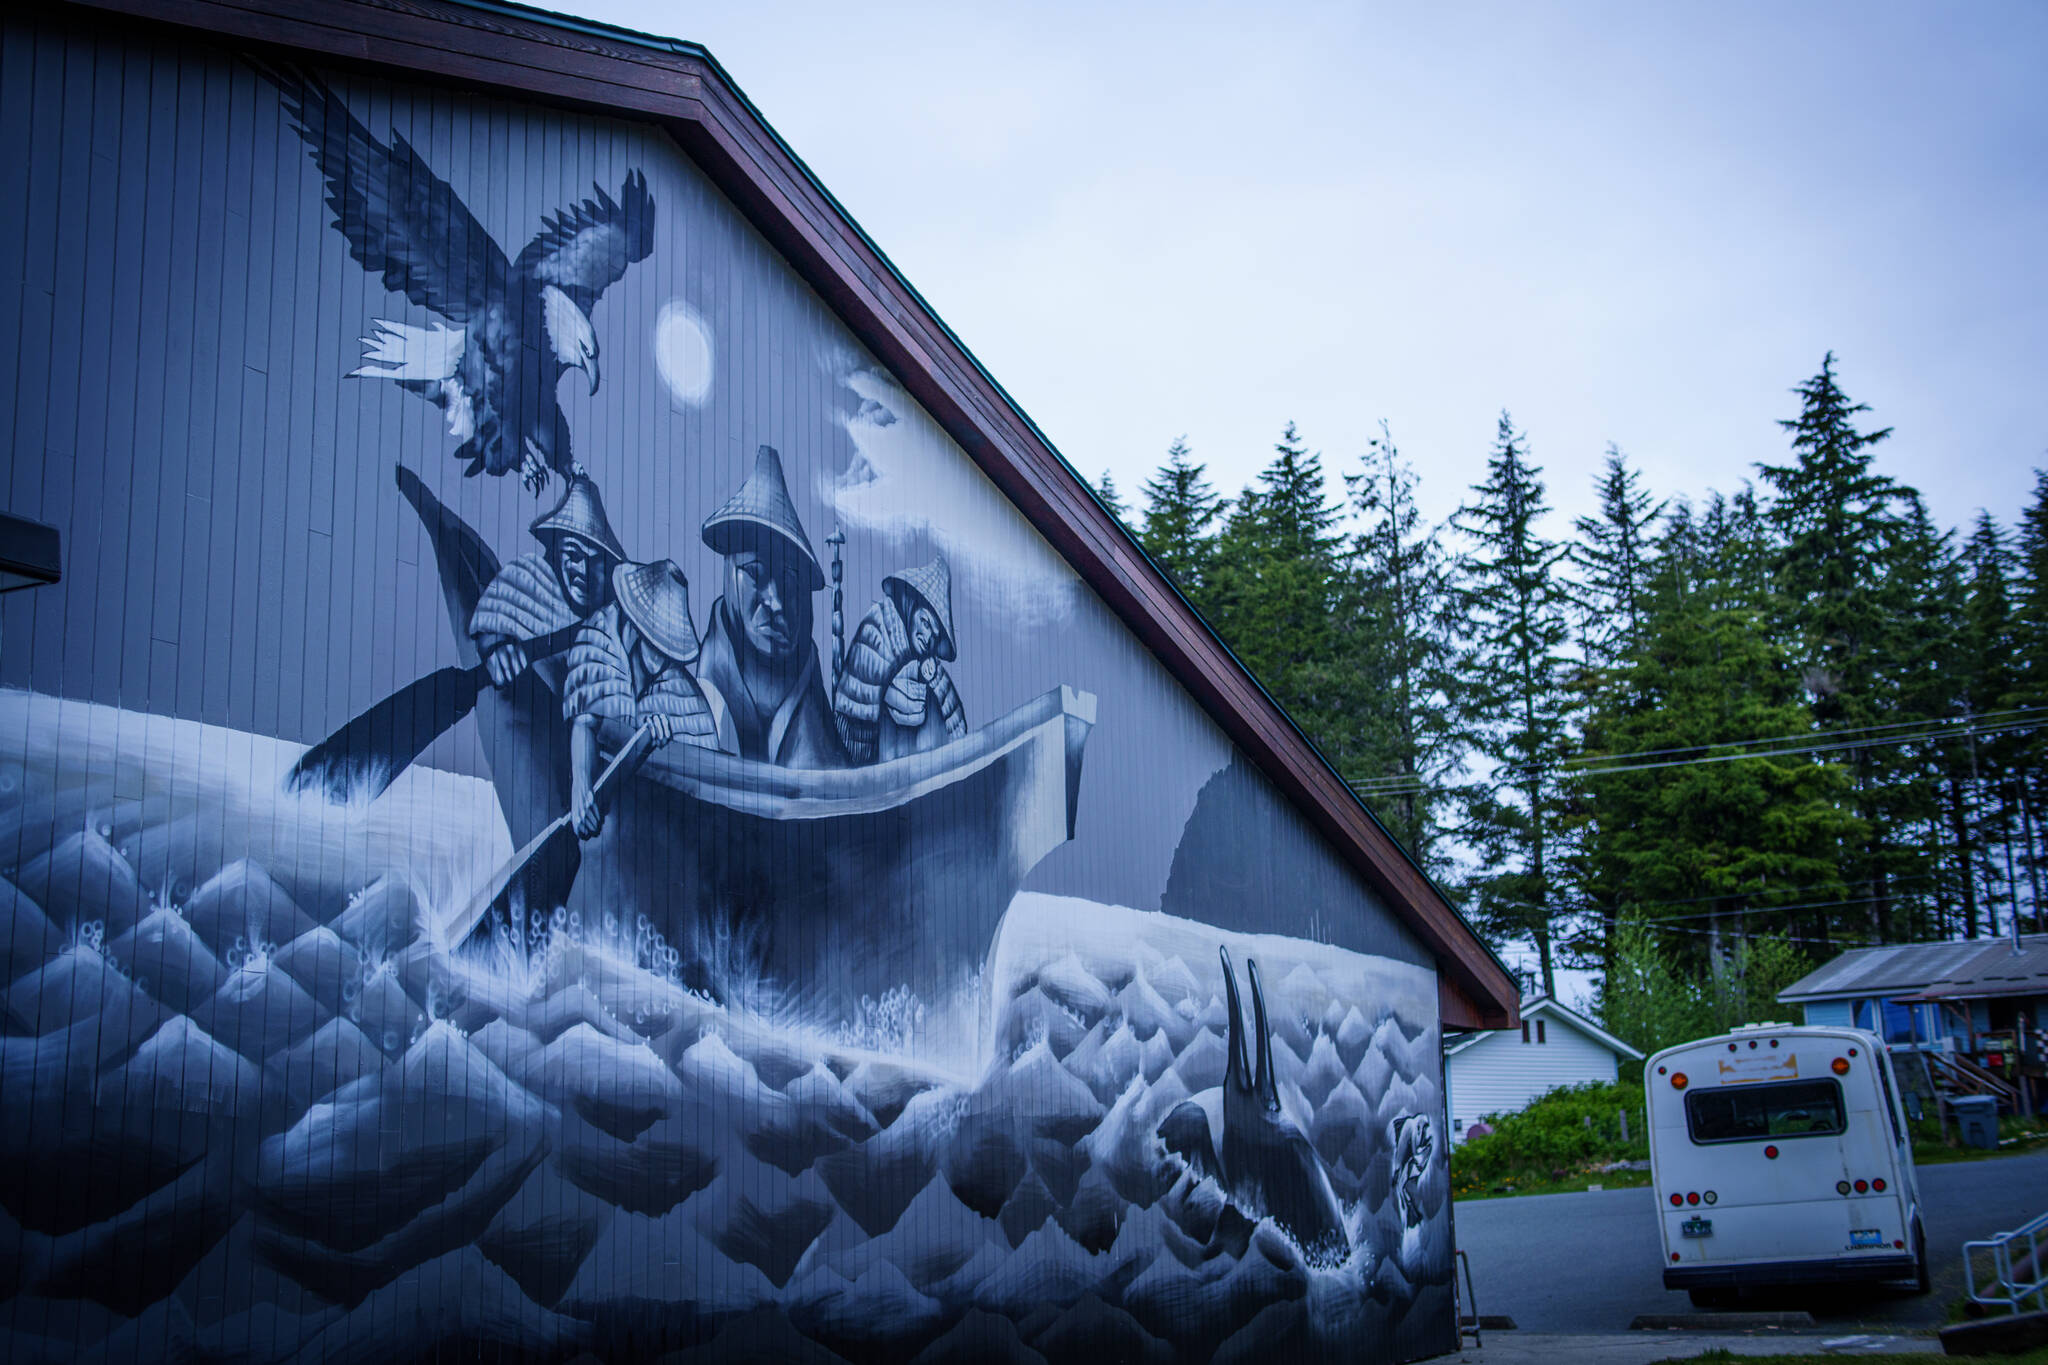 In March 2020, Hydaburg began displacing thousands of gallons of expensive imported heating oil with low-grade waste wood to heat their school buildings. Photo of the school building with the beautiful new mural by Haida artist Andrew Morrison, (Courtesy Photo / Bethany S Goodrich)